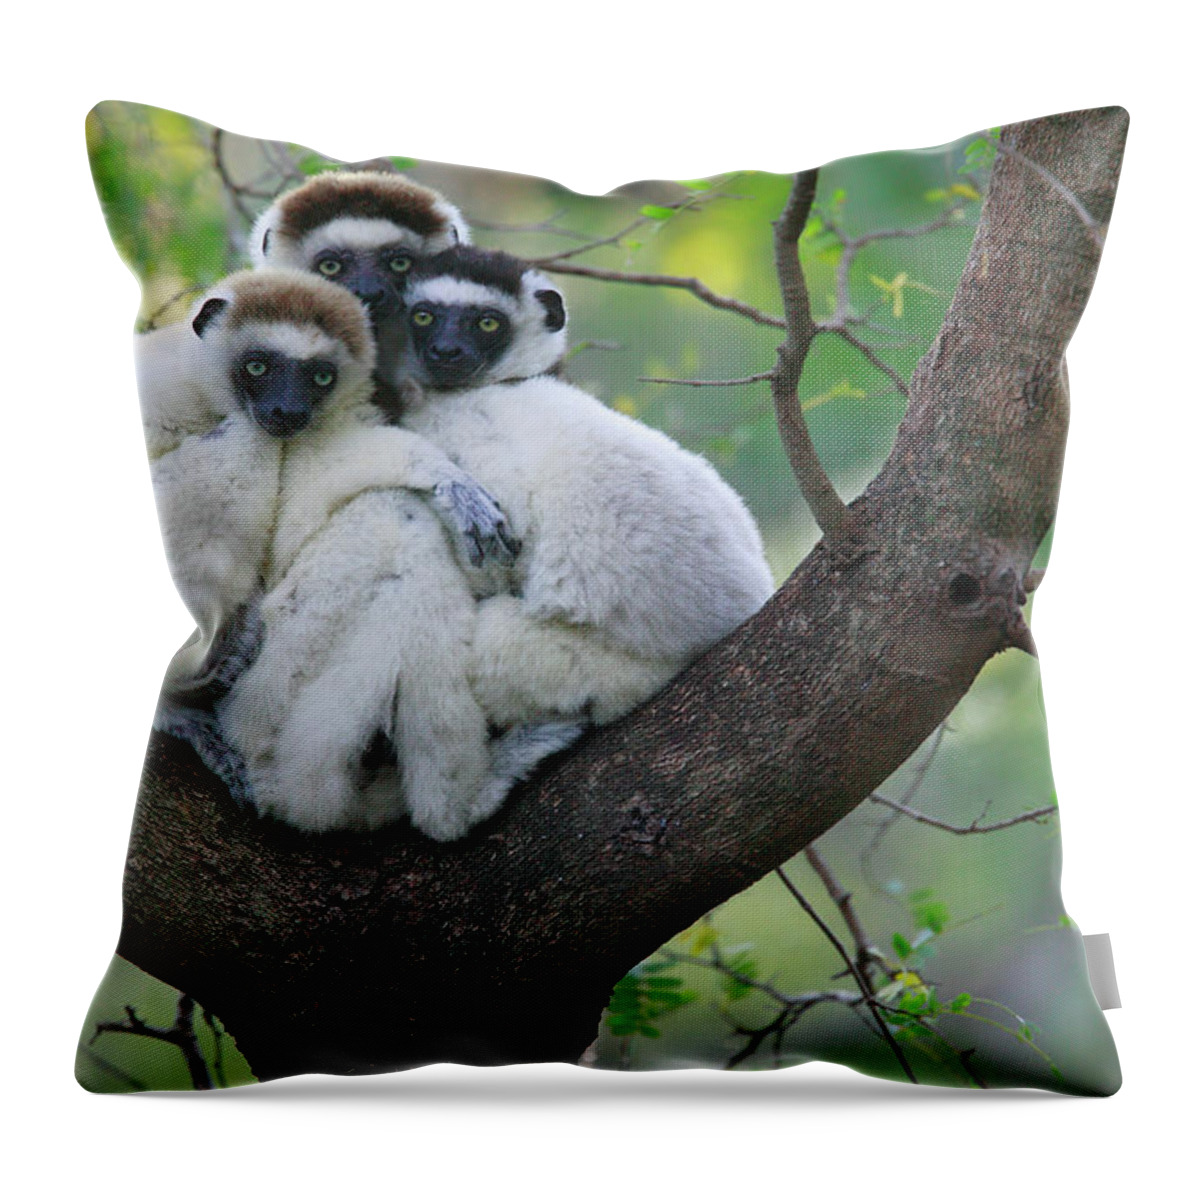 Jh Throw Pillow featuring the photograph Verreauxs Sifakas Cuddling by Cyril Ruoso